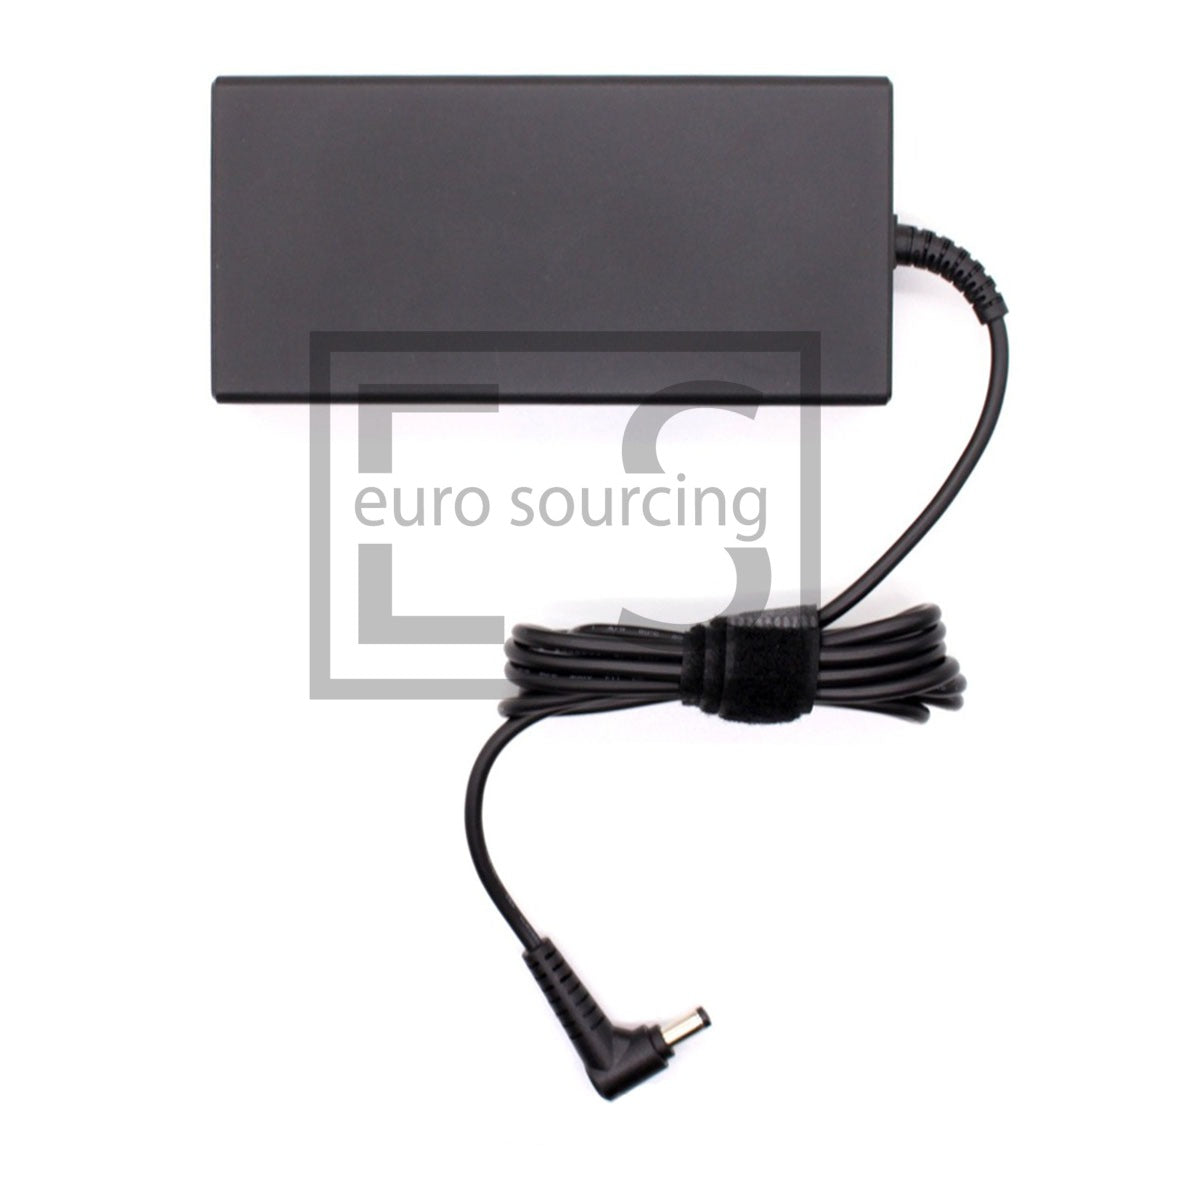 Genuine Delta 180W 19.5V 9.23A 5.5MM x 2.5MM Gaming Laptop Adapter Power Supply Compatible With ASUS ROG G751JL